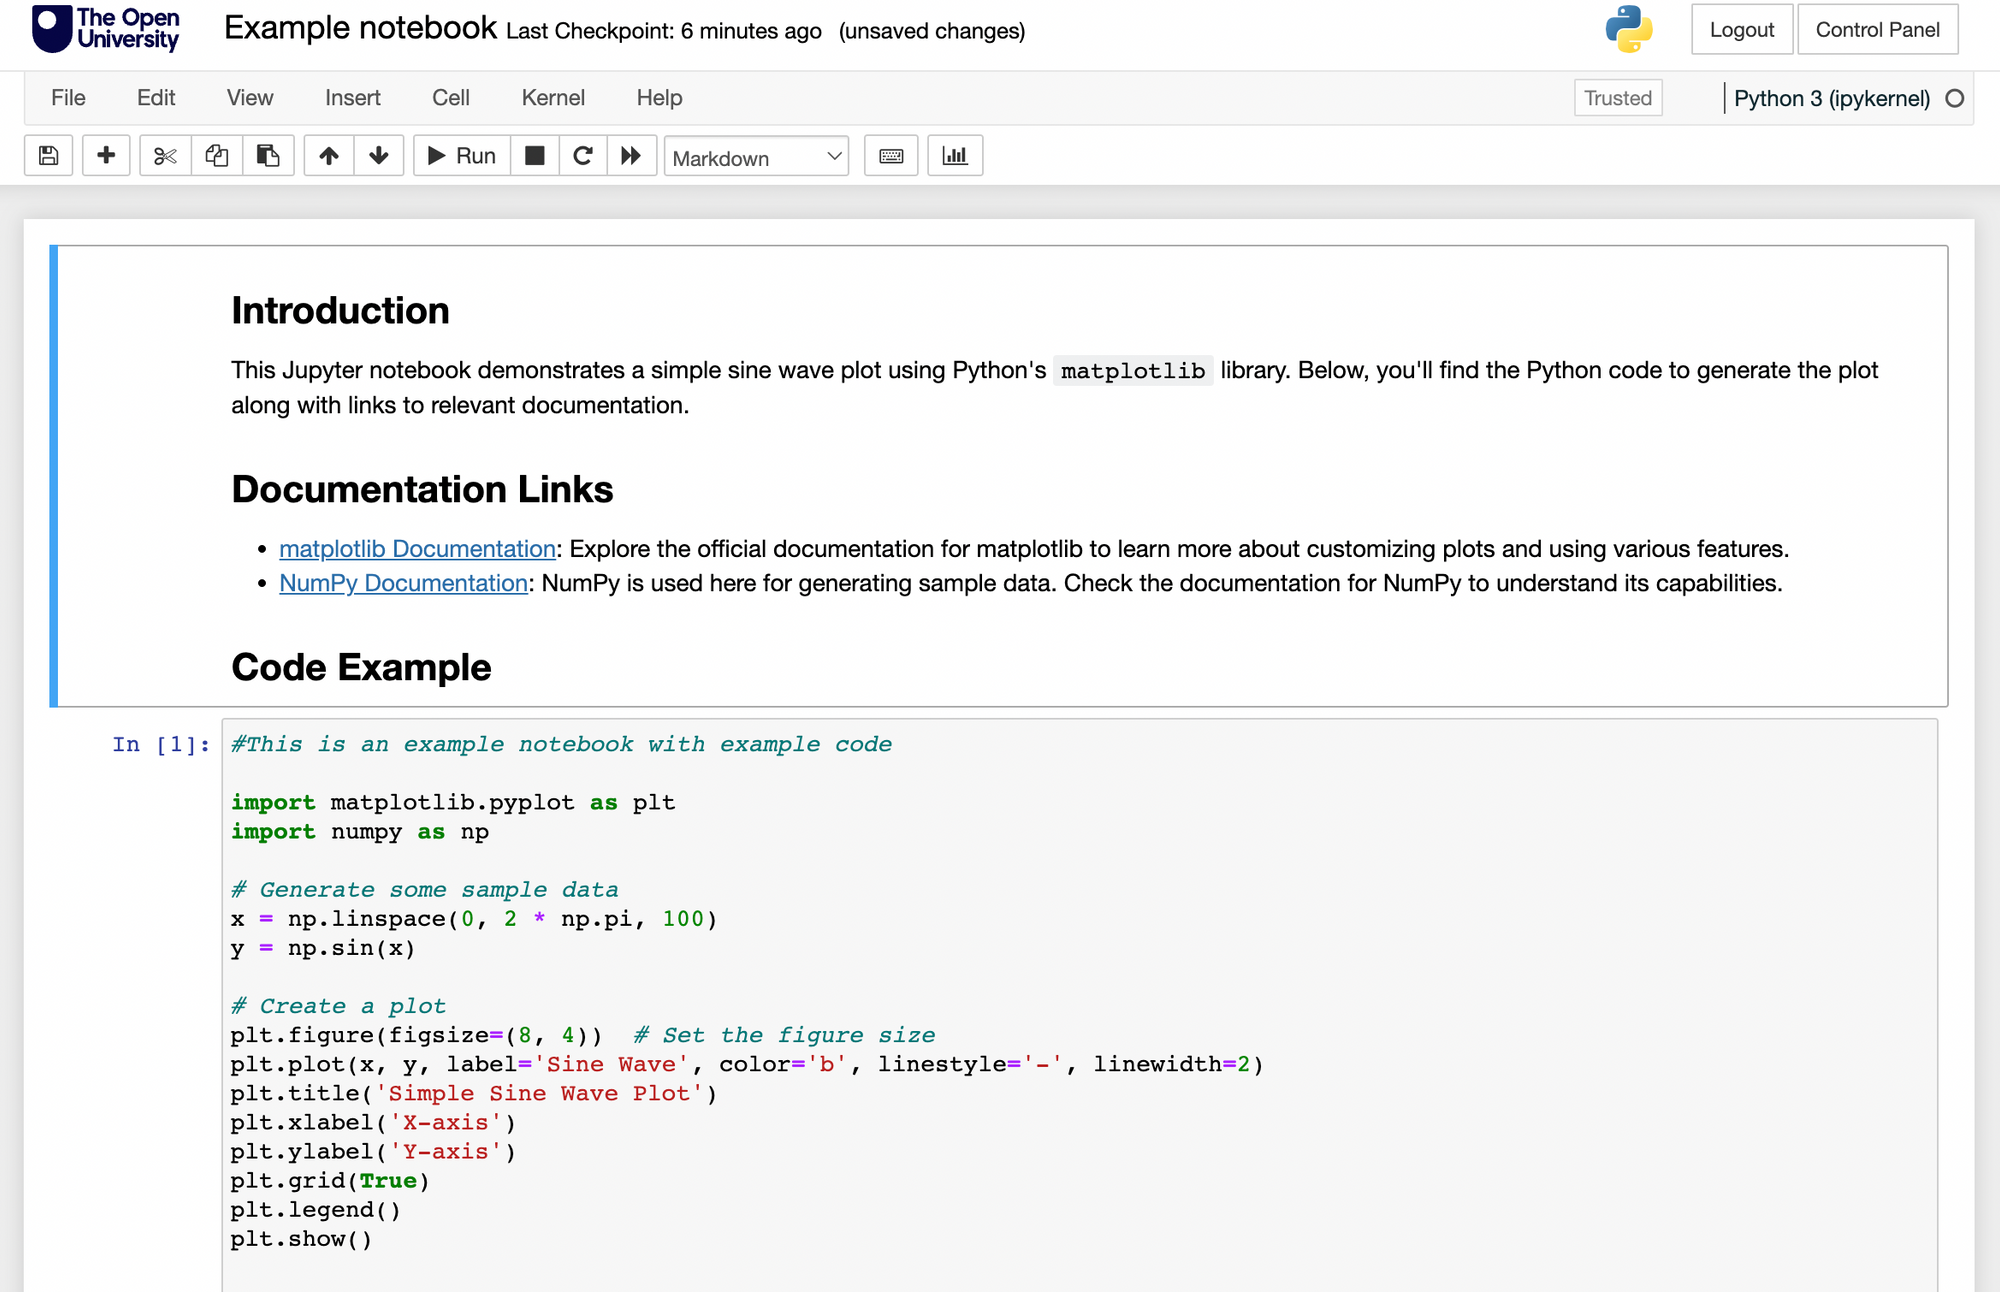 Example screenshot of Jupyter Notebooks with Markdown copy and links